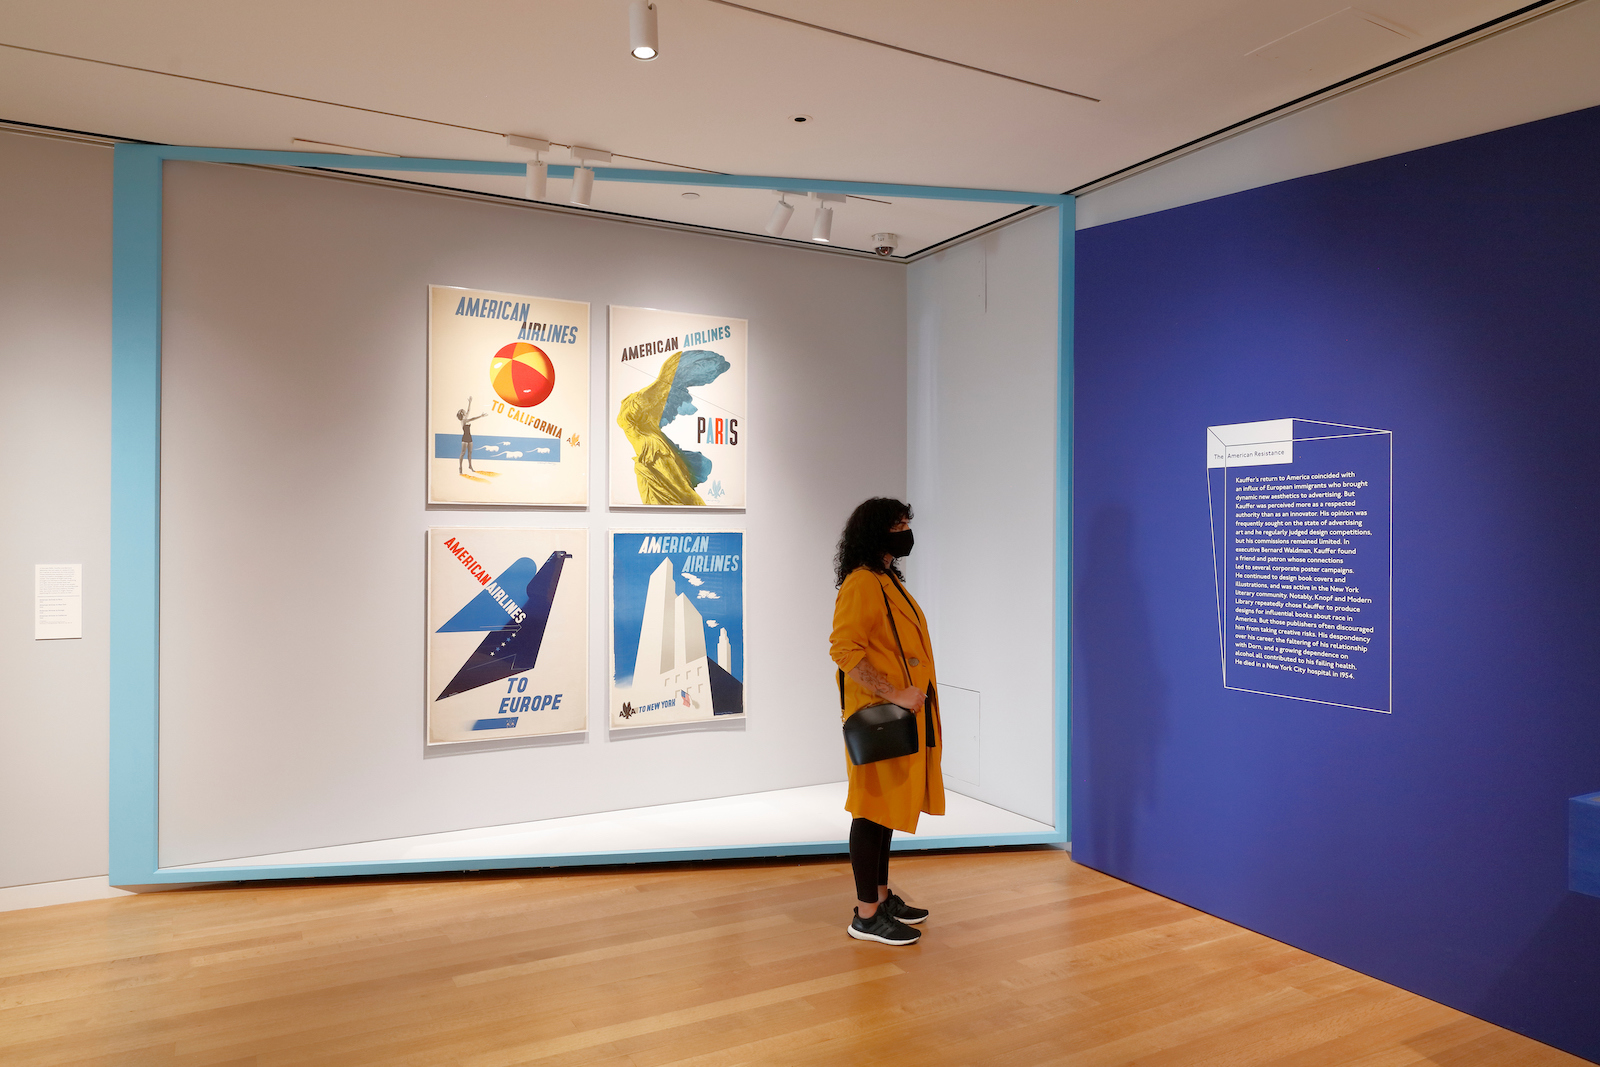 A person with curly black hair dressed in a yellow coat stands in an exhibition space reading white text on a royal blue wall with a wall of four, brightly-colored, graphic posters advertising American airlines behind